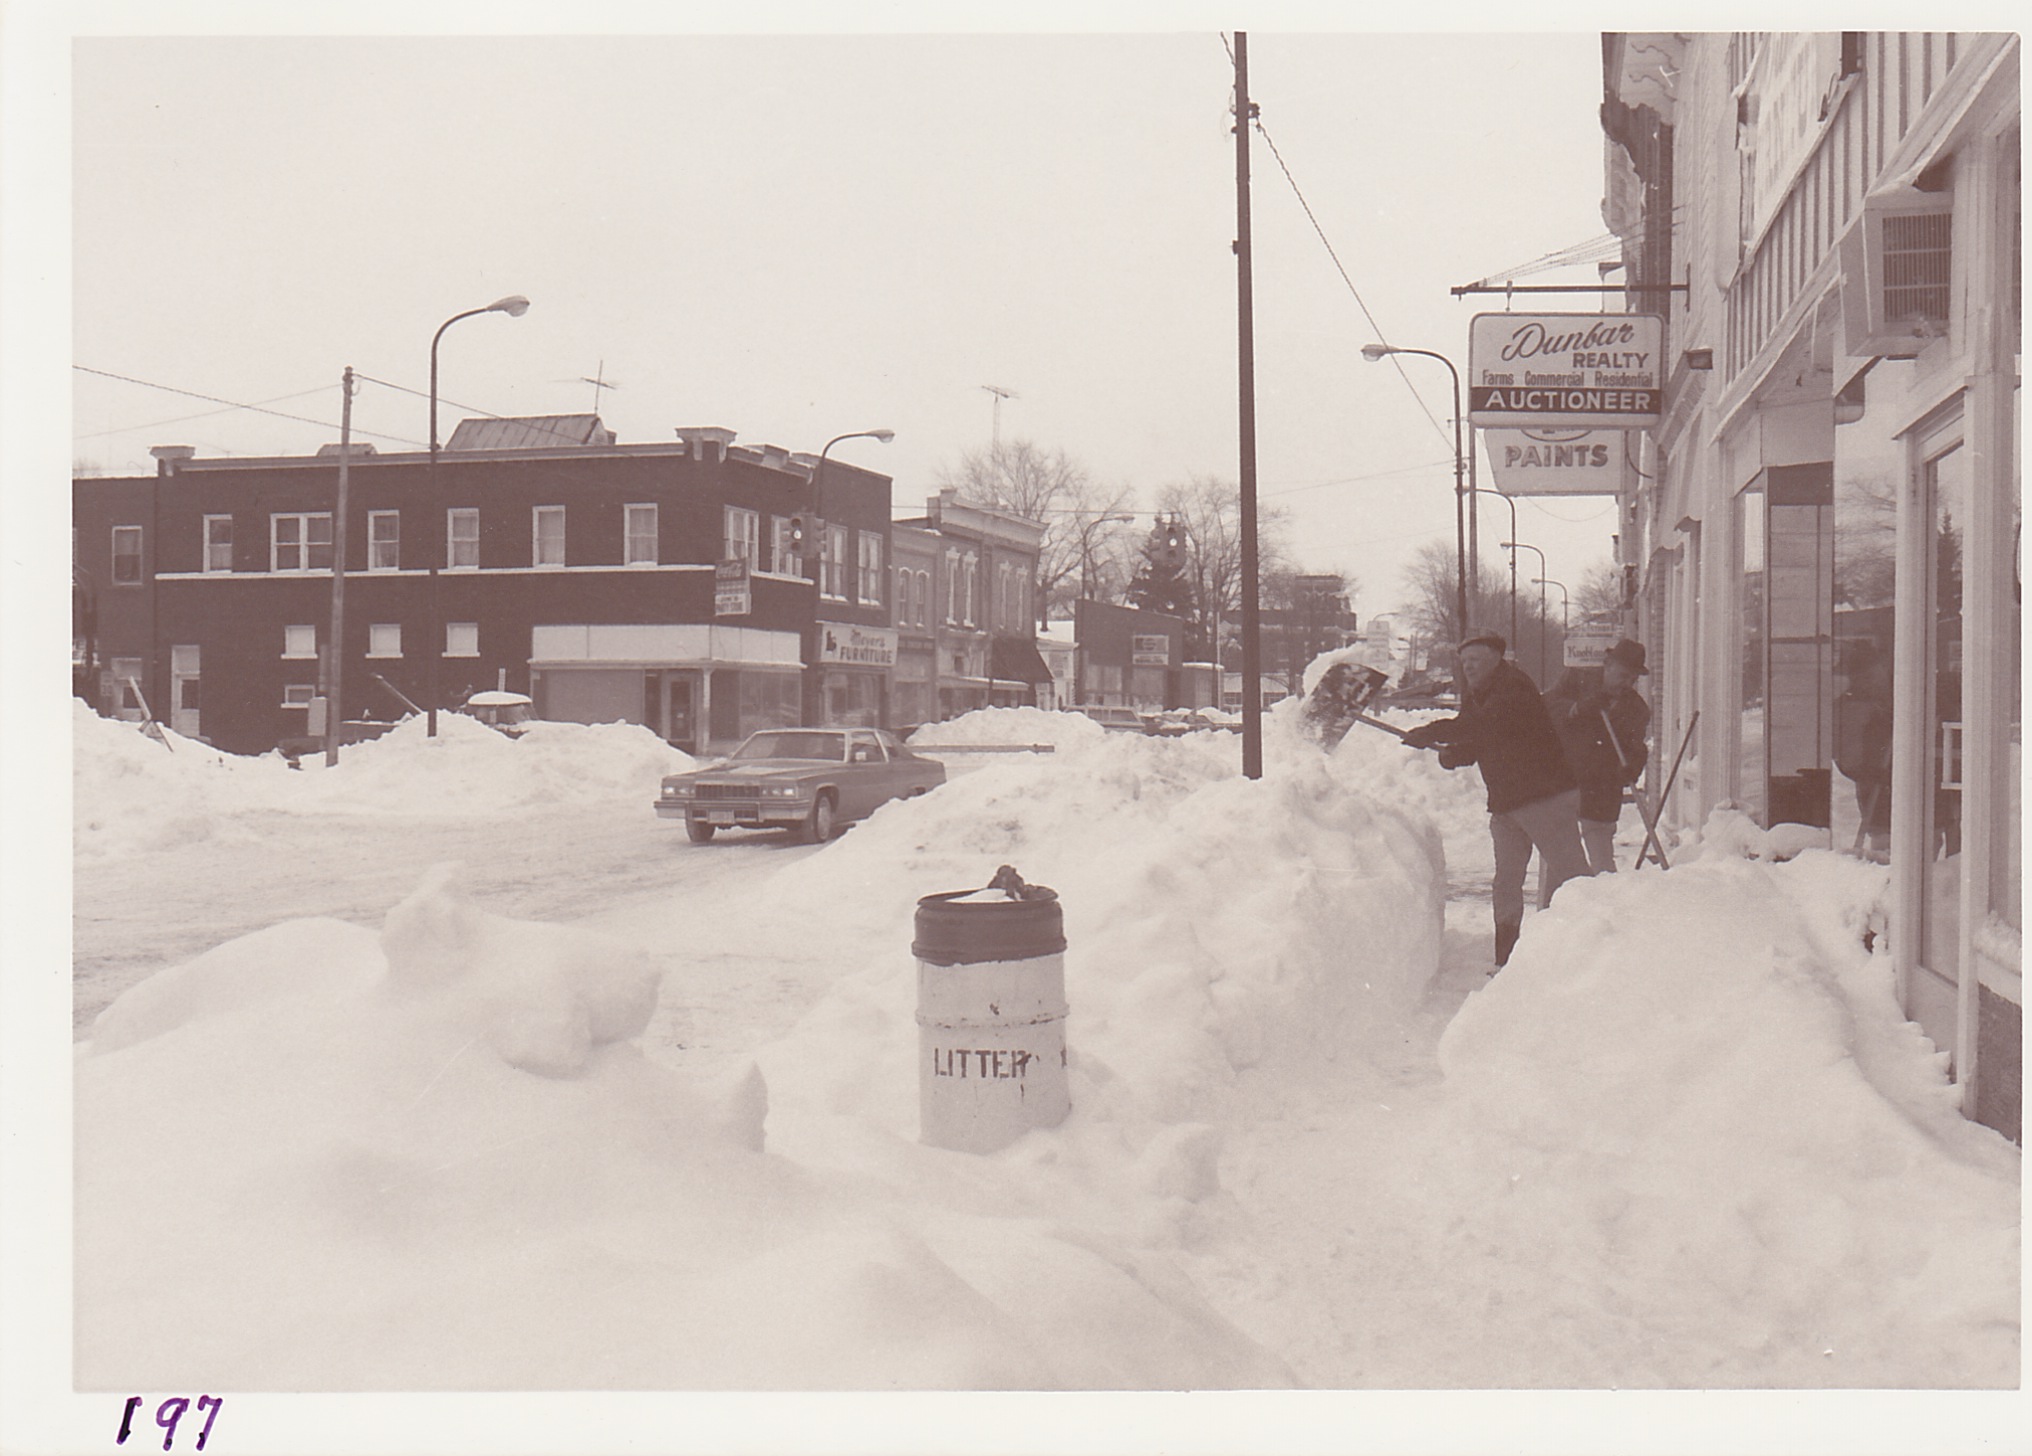 Harold Smith and Mel Oberling shoveling a path in front of their respective businesses, following the blizzard.